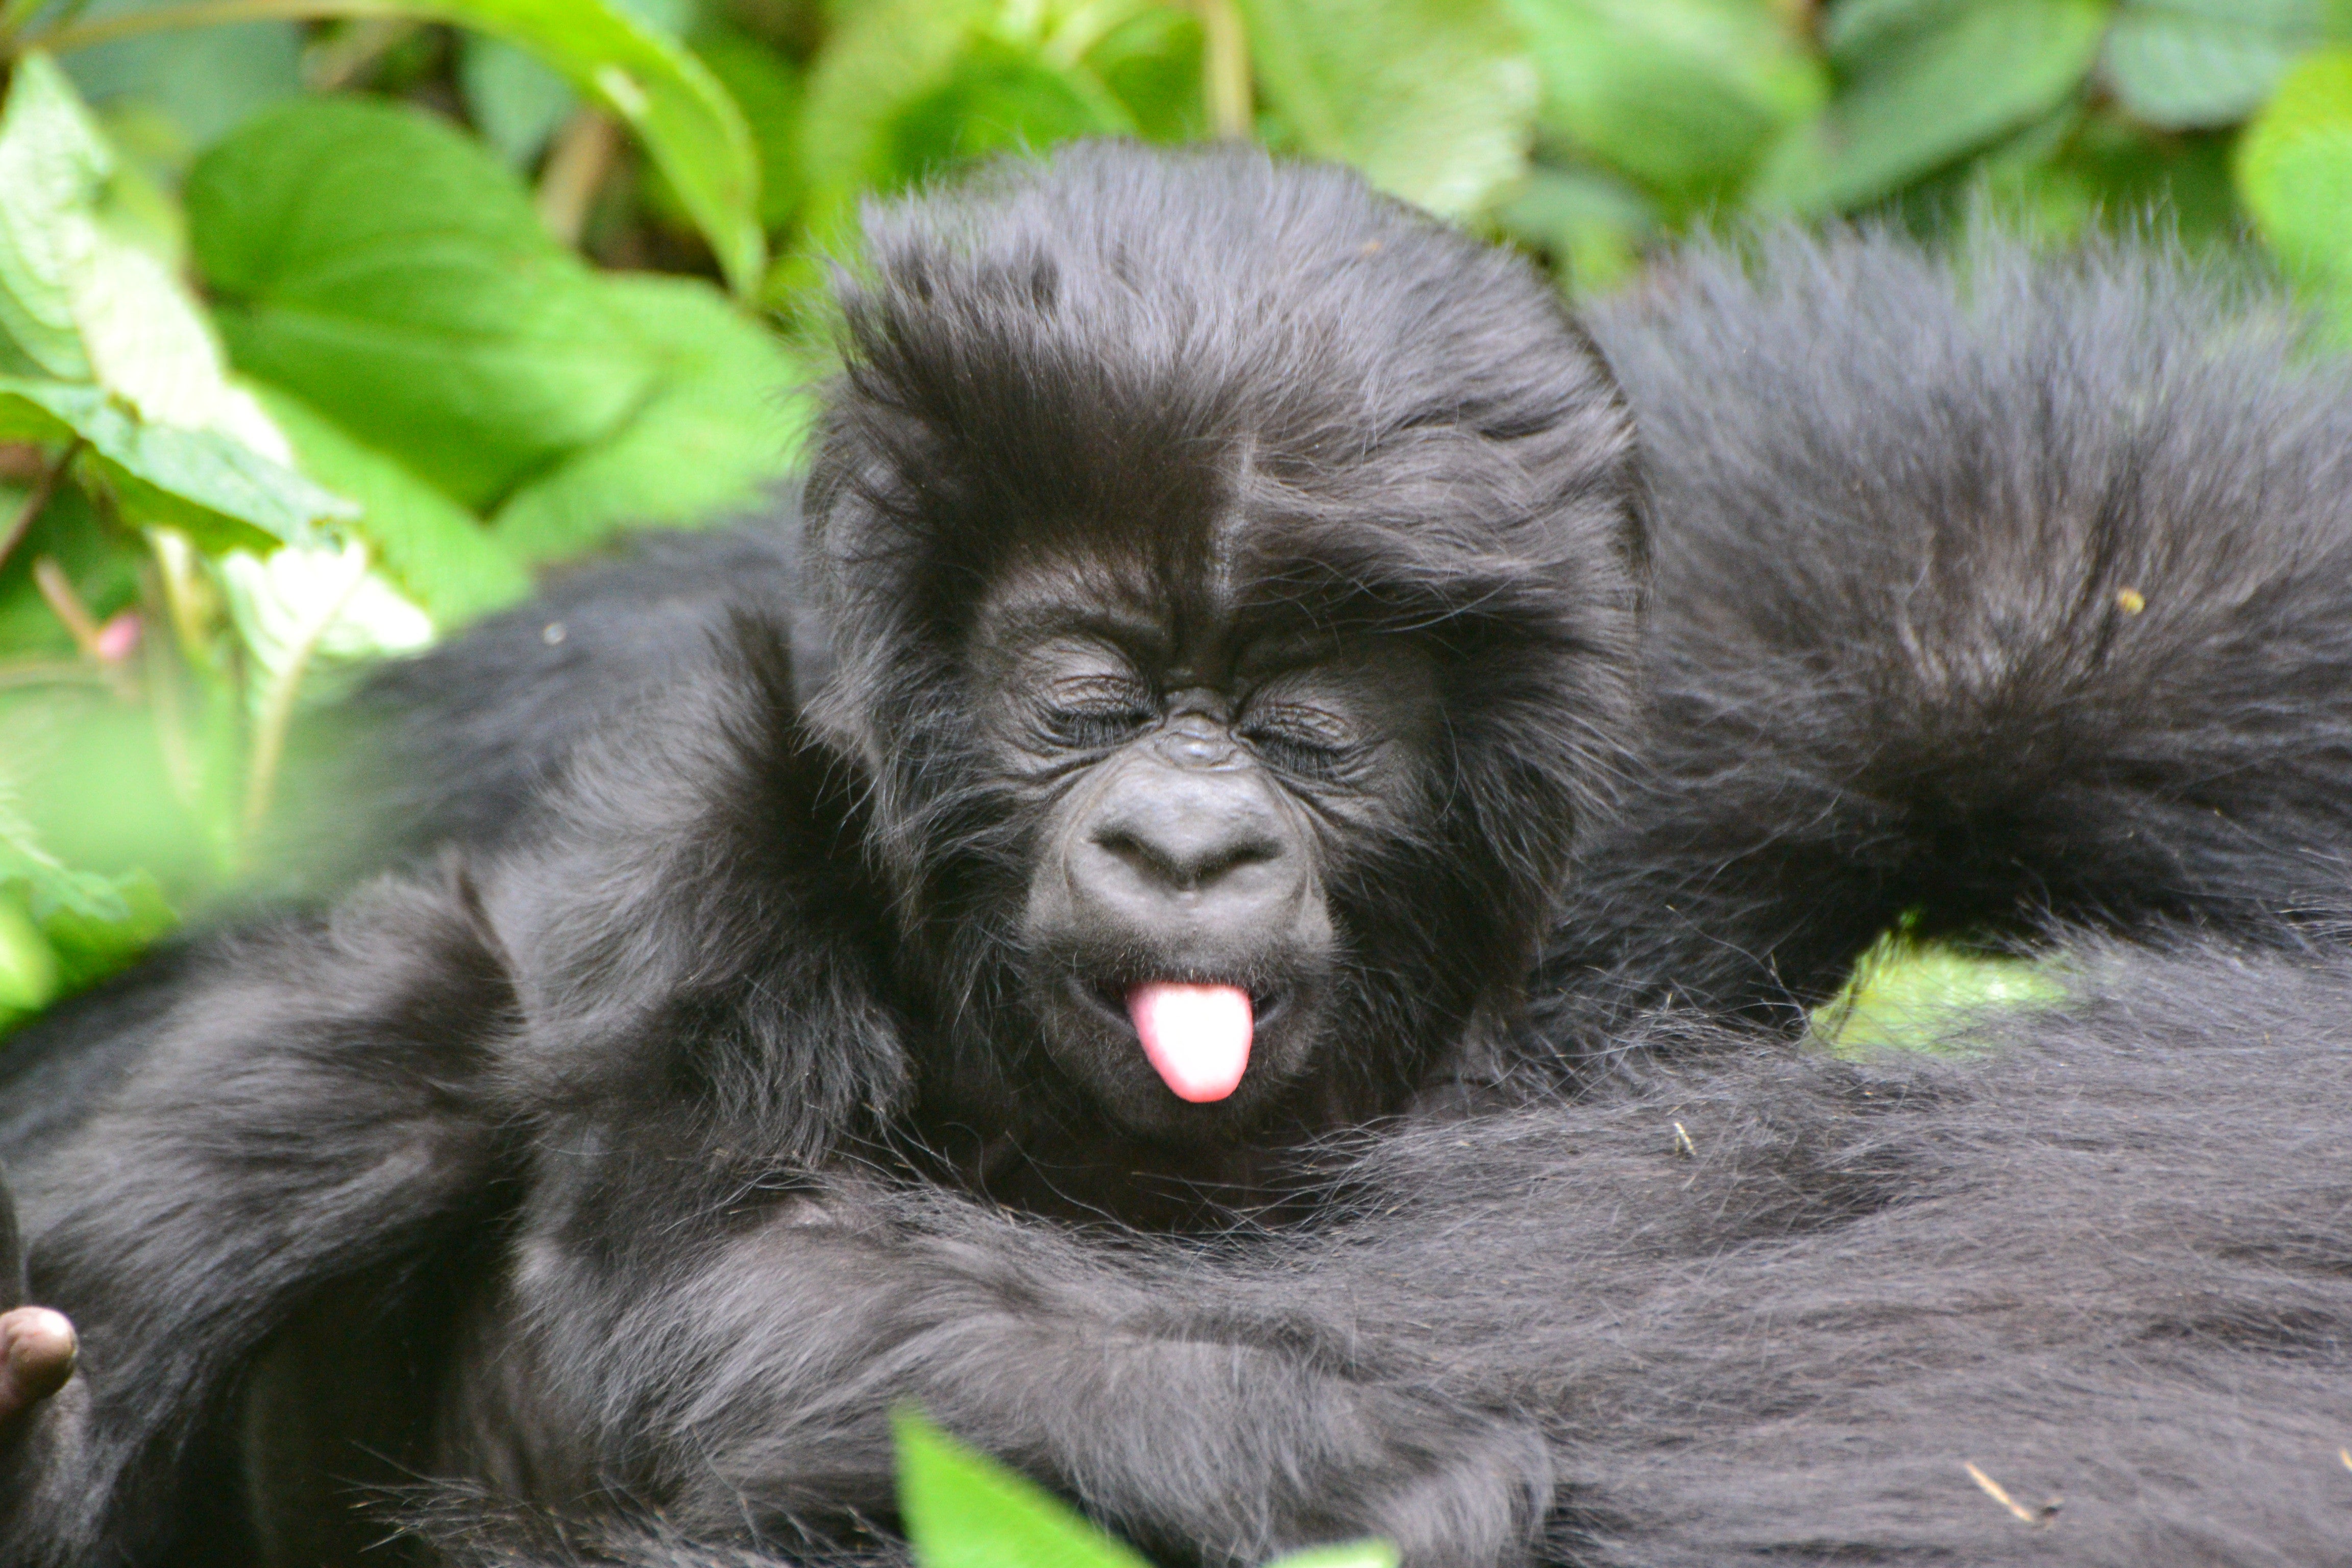 Each year there’s a naming ceremony for Rwanda’s baby gorillas